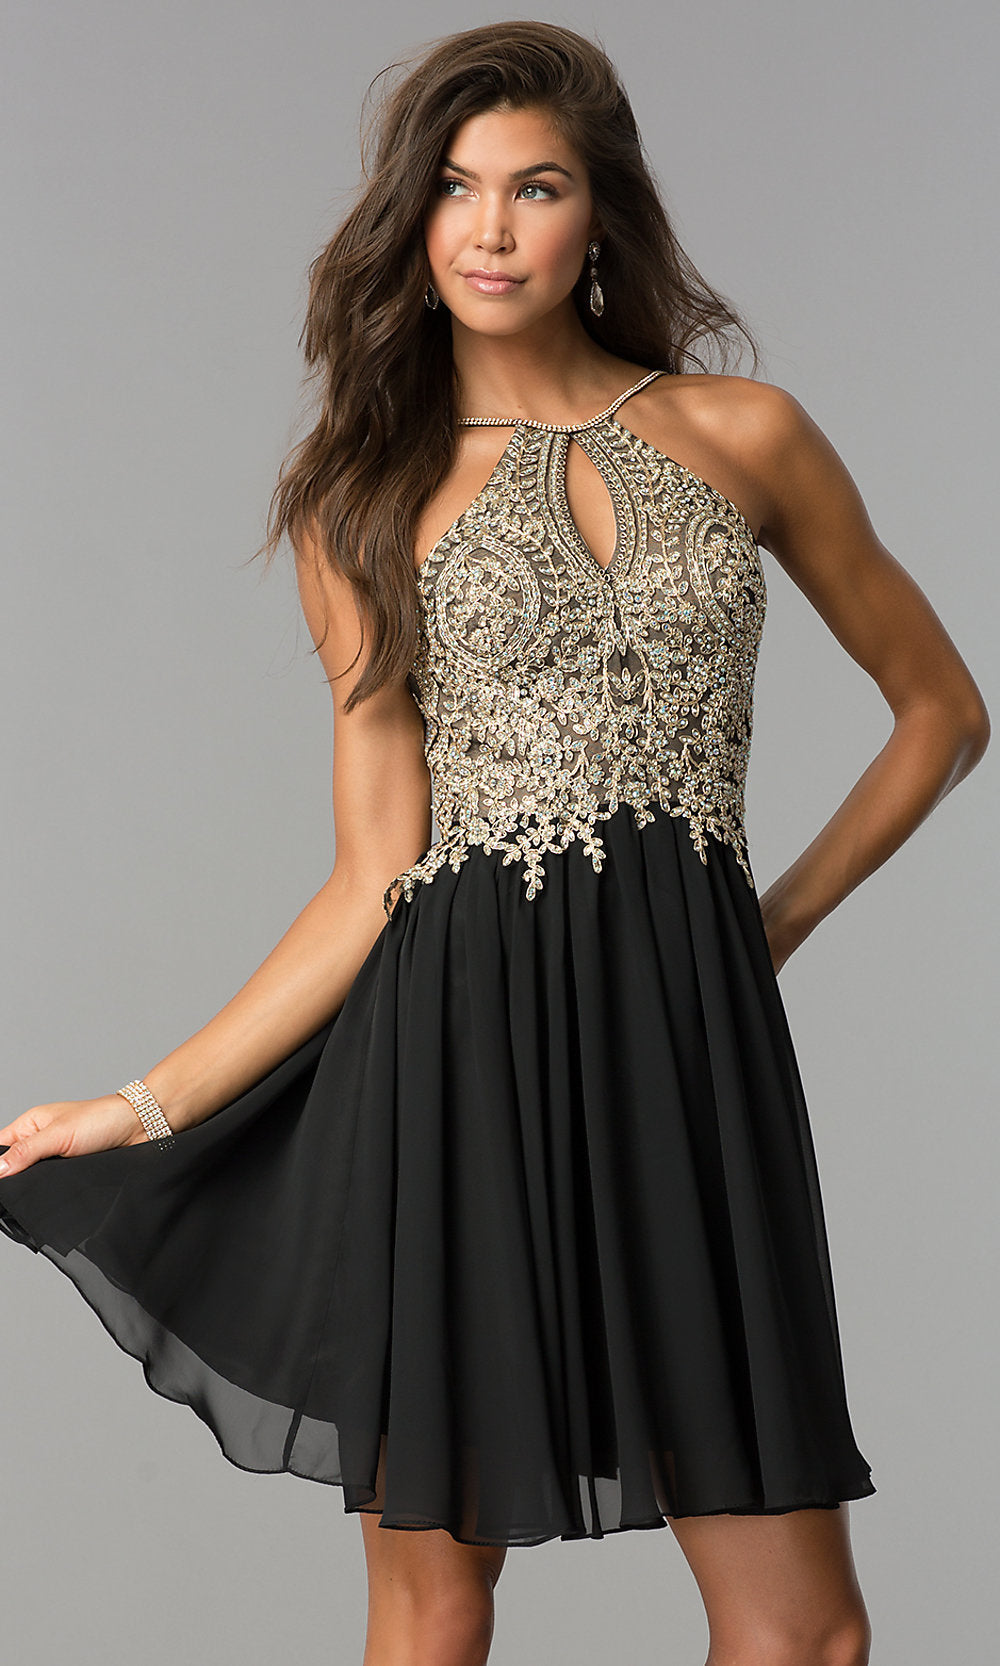 Black Short Homecoming Dress with Beaded High-Neck Bodice